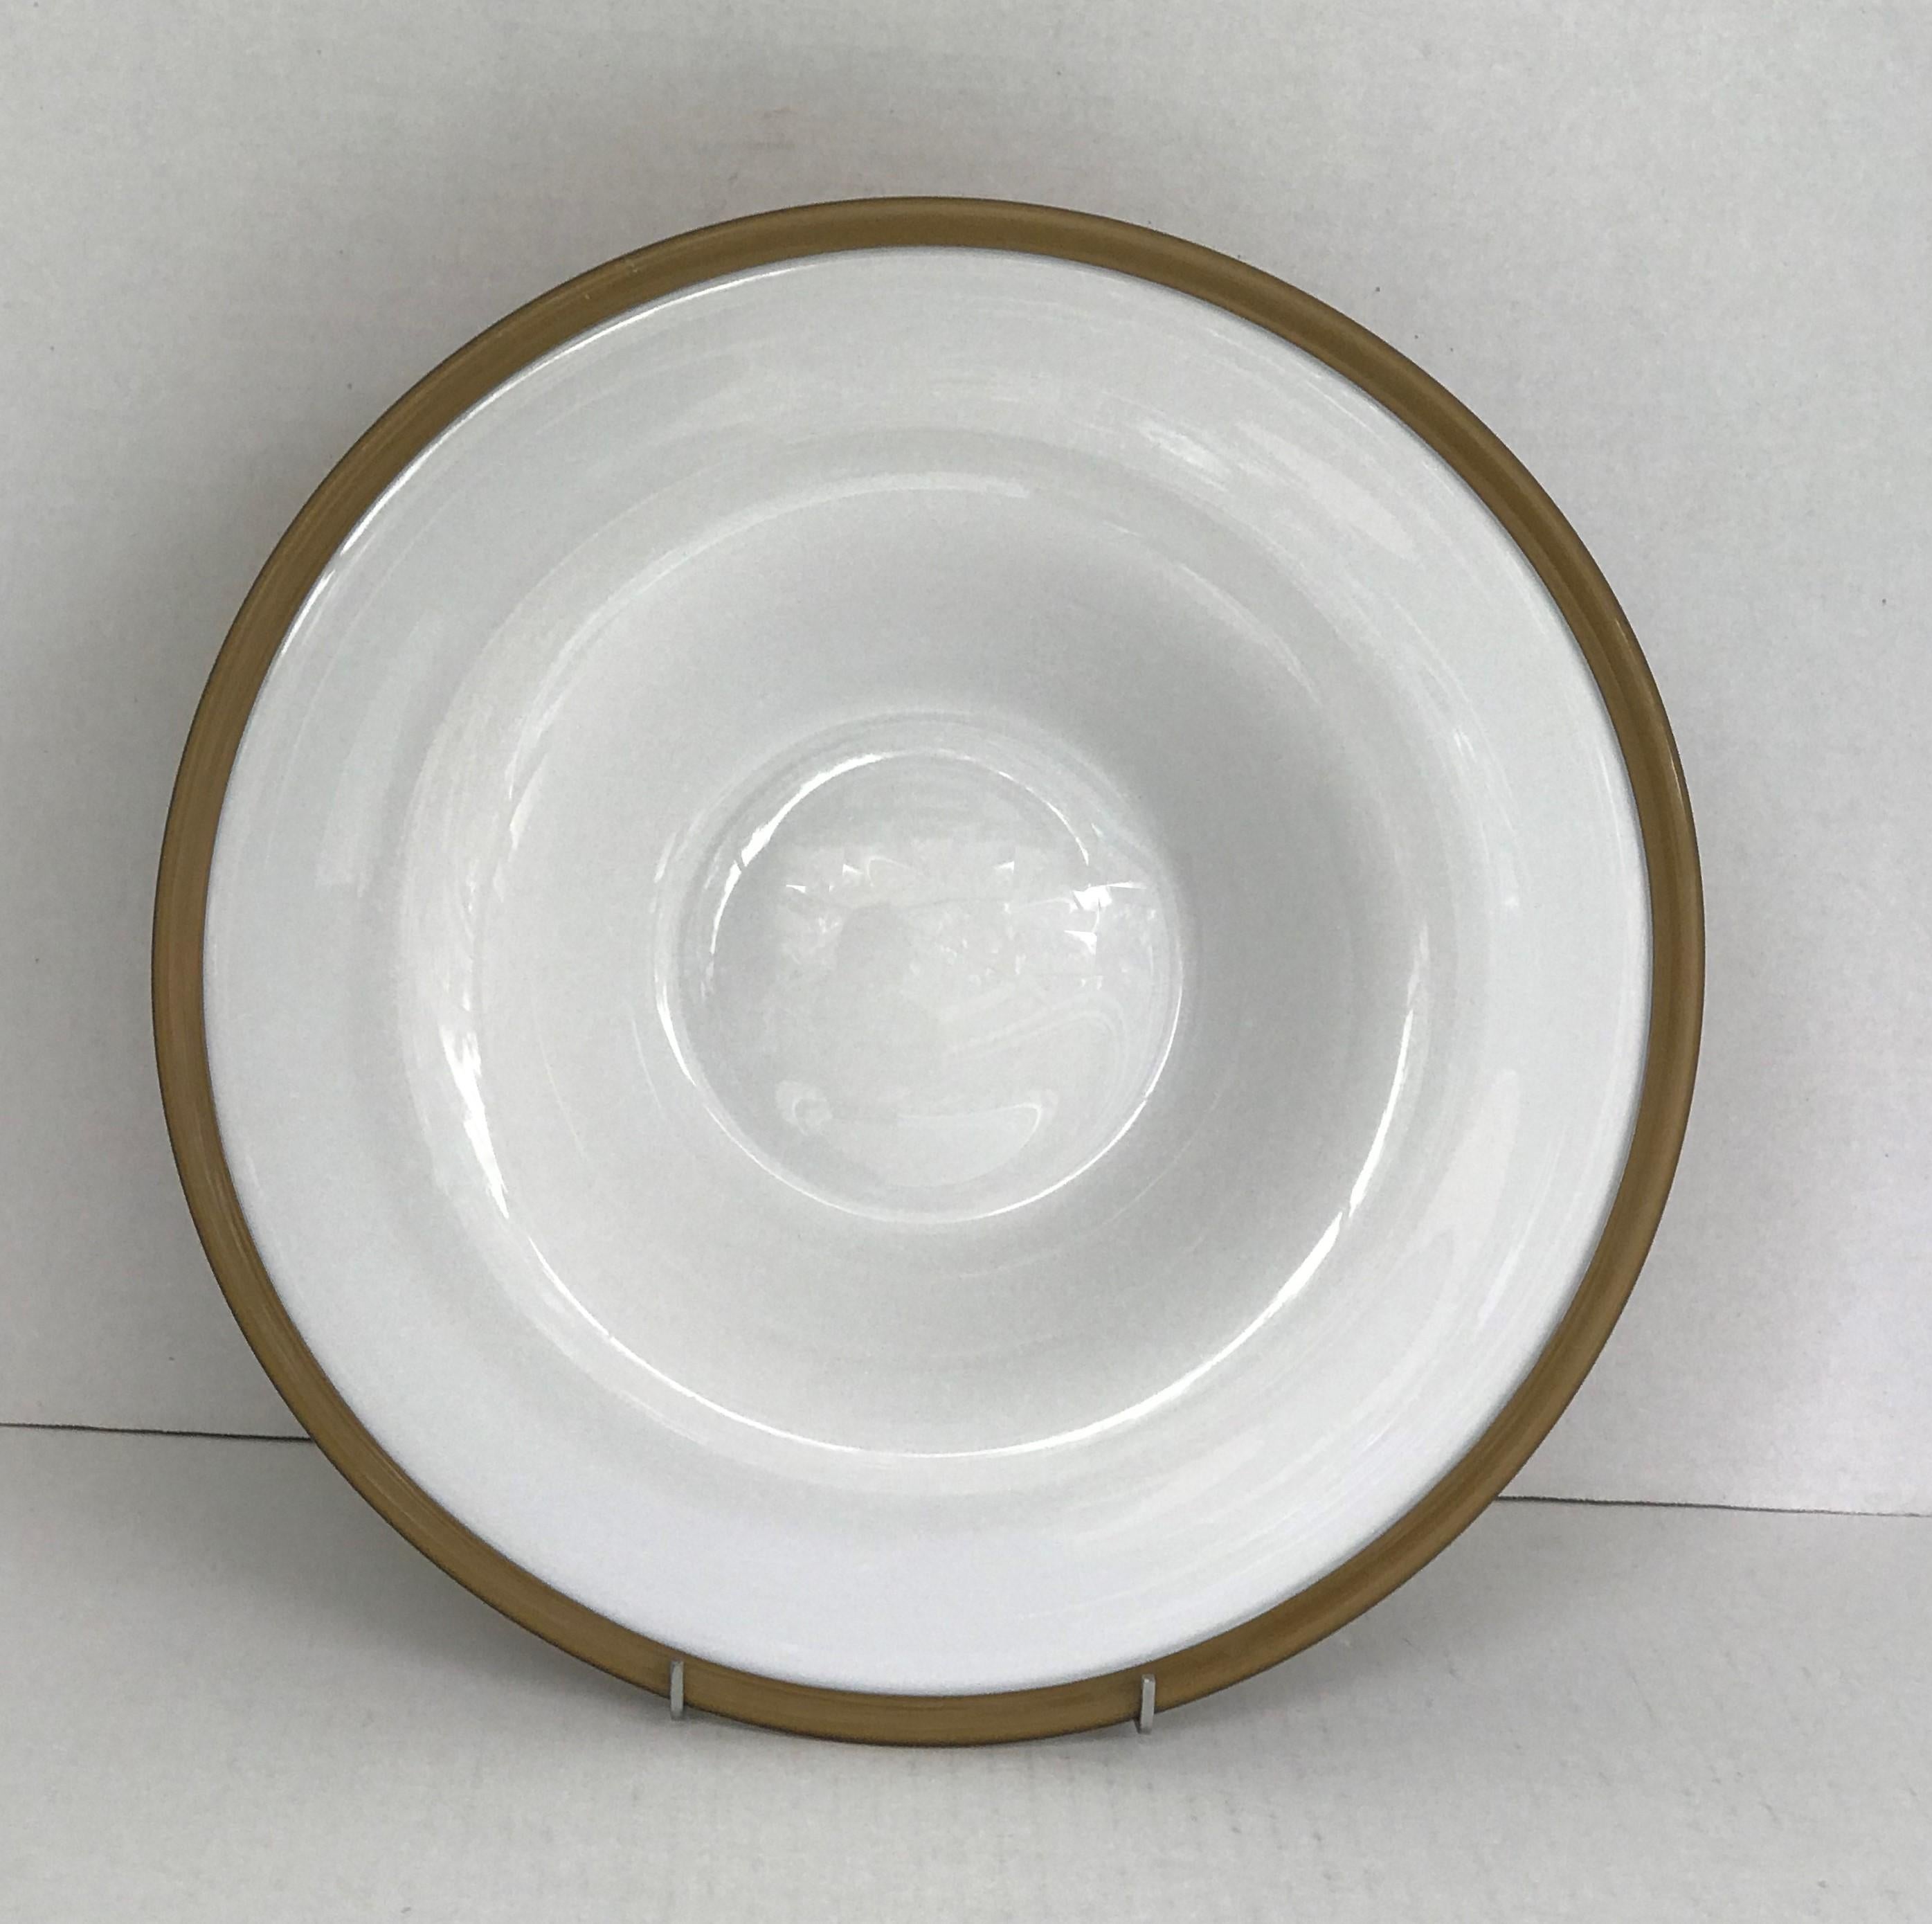 Scandinavian Mid-Century Modern center piece or large platter in cased glass with inside white center and golden bronze color outside and rim. Beautifully executed in the 1960s by Danish manufacturer Odense Glass Factory (later Holmegaard) from a